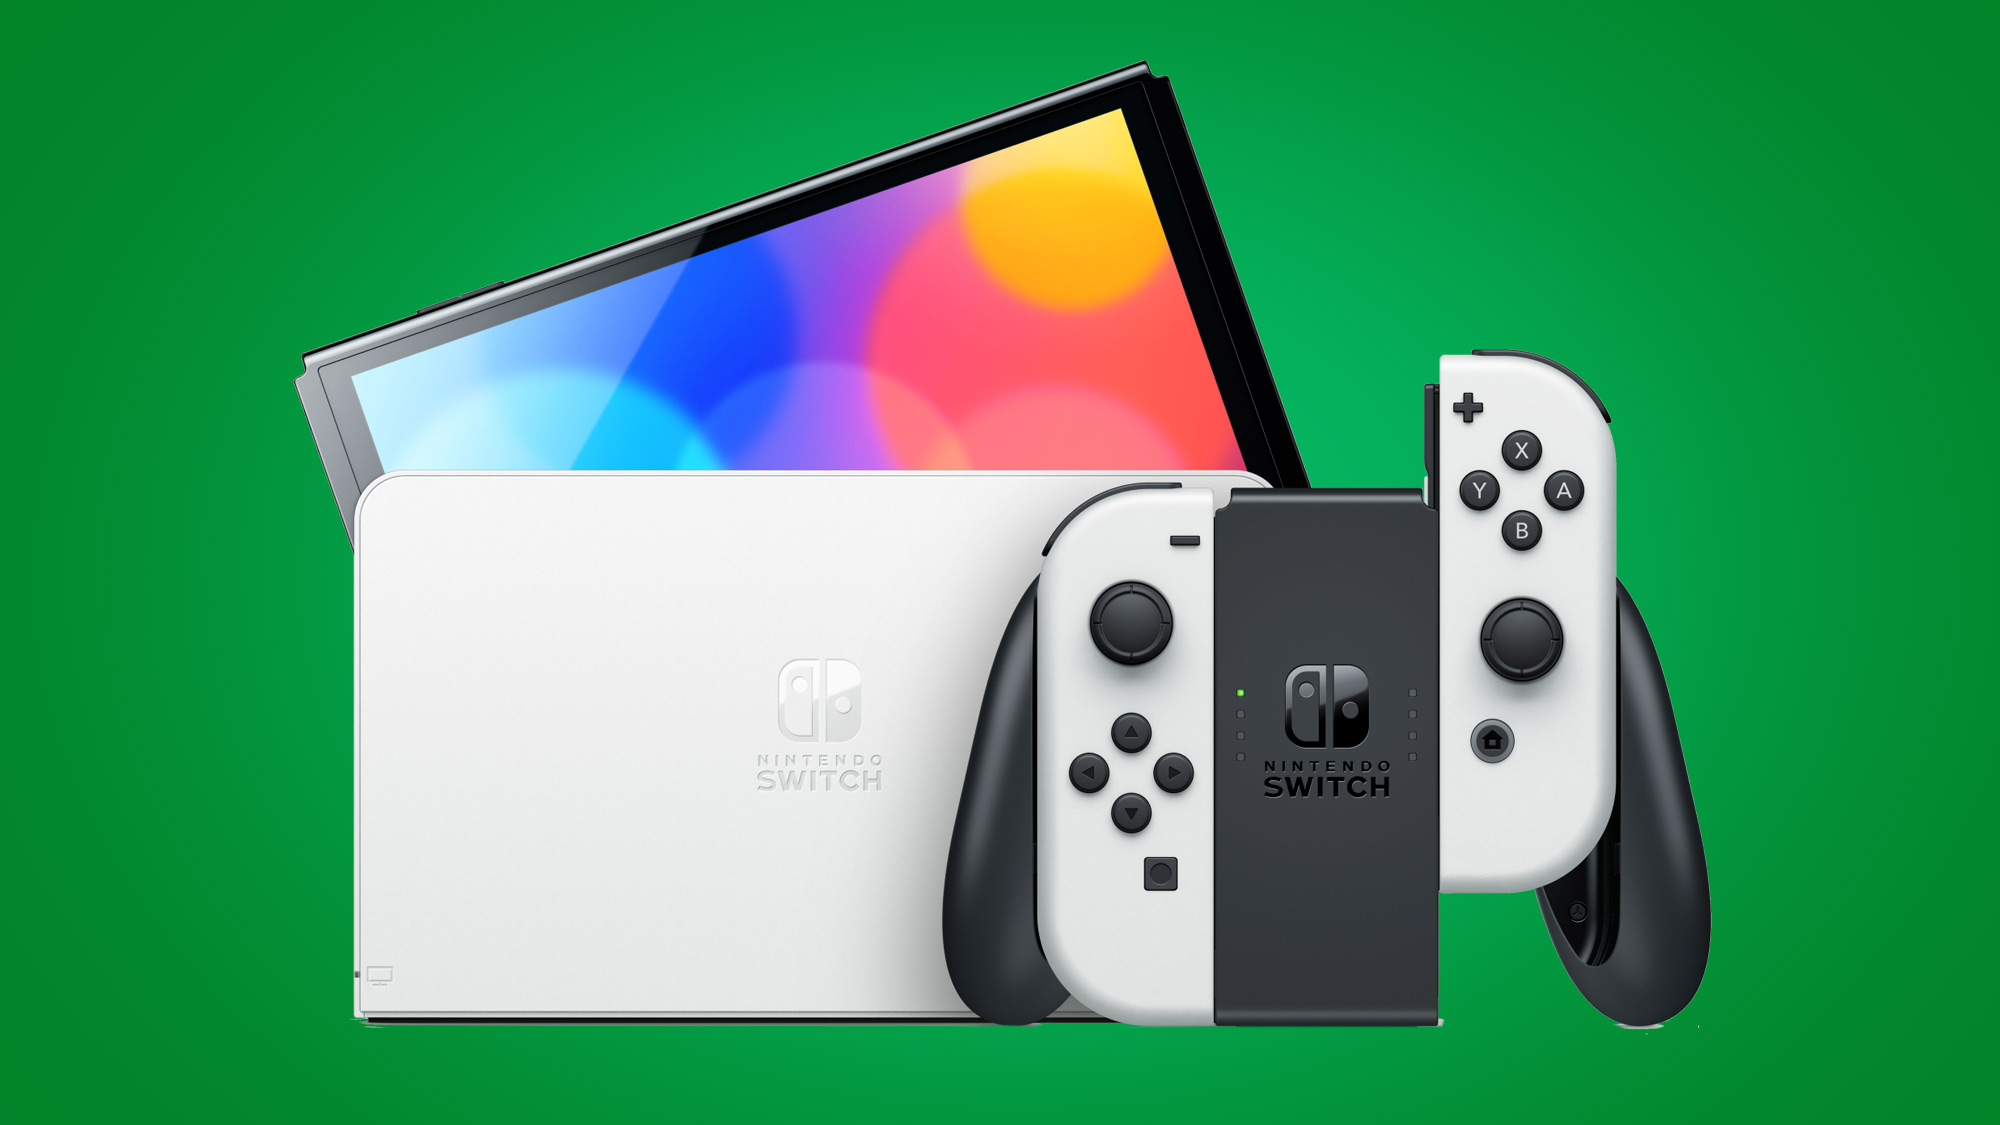 Nintendo Switch OLED stock: Where to preorder